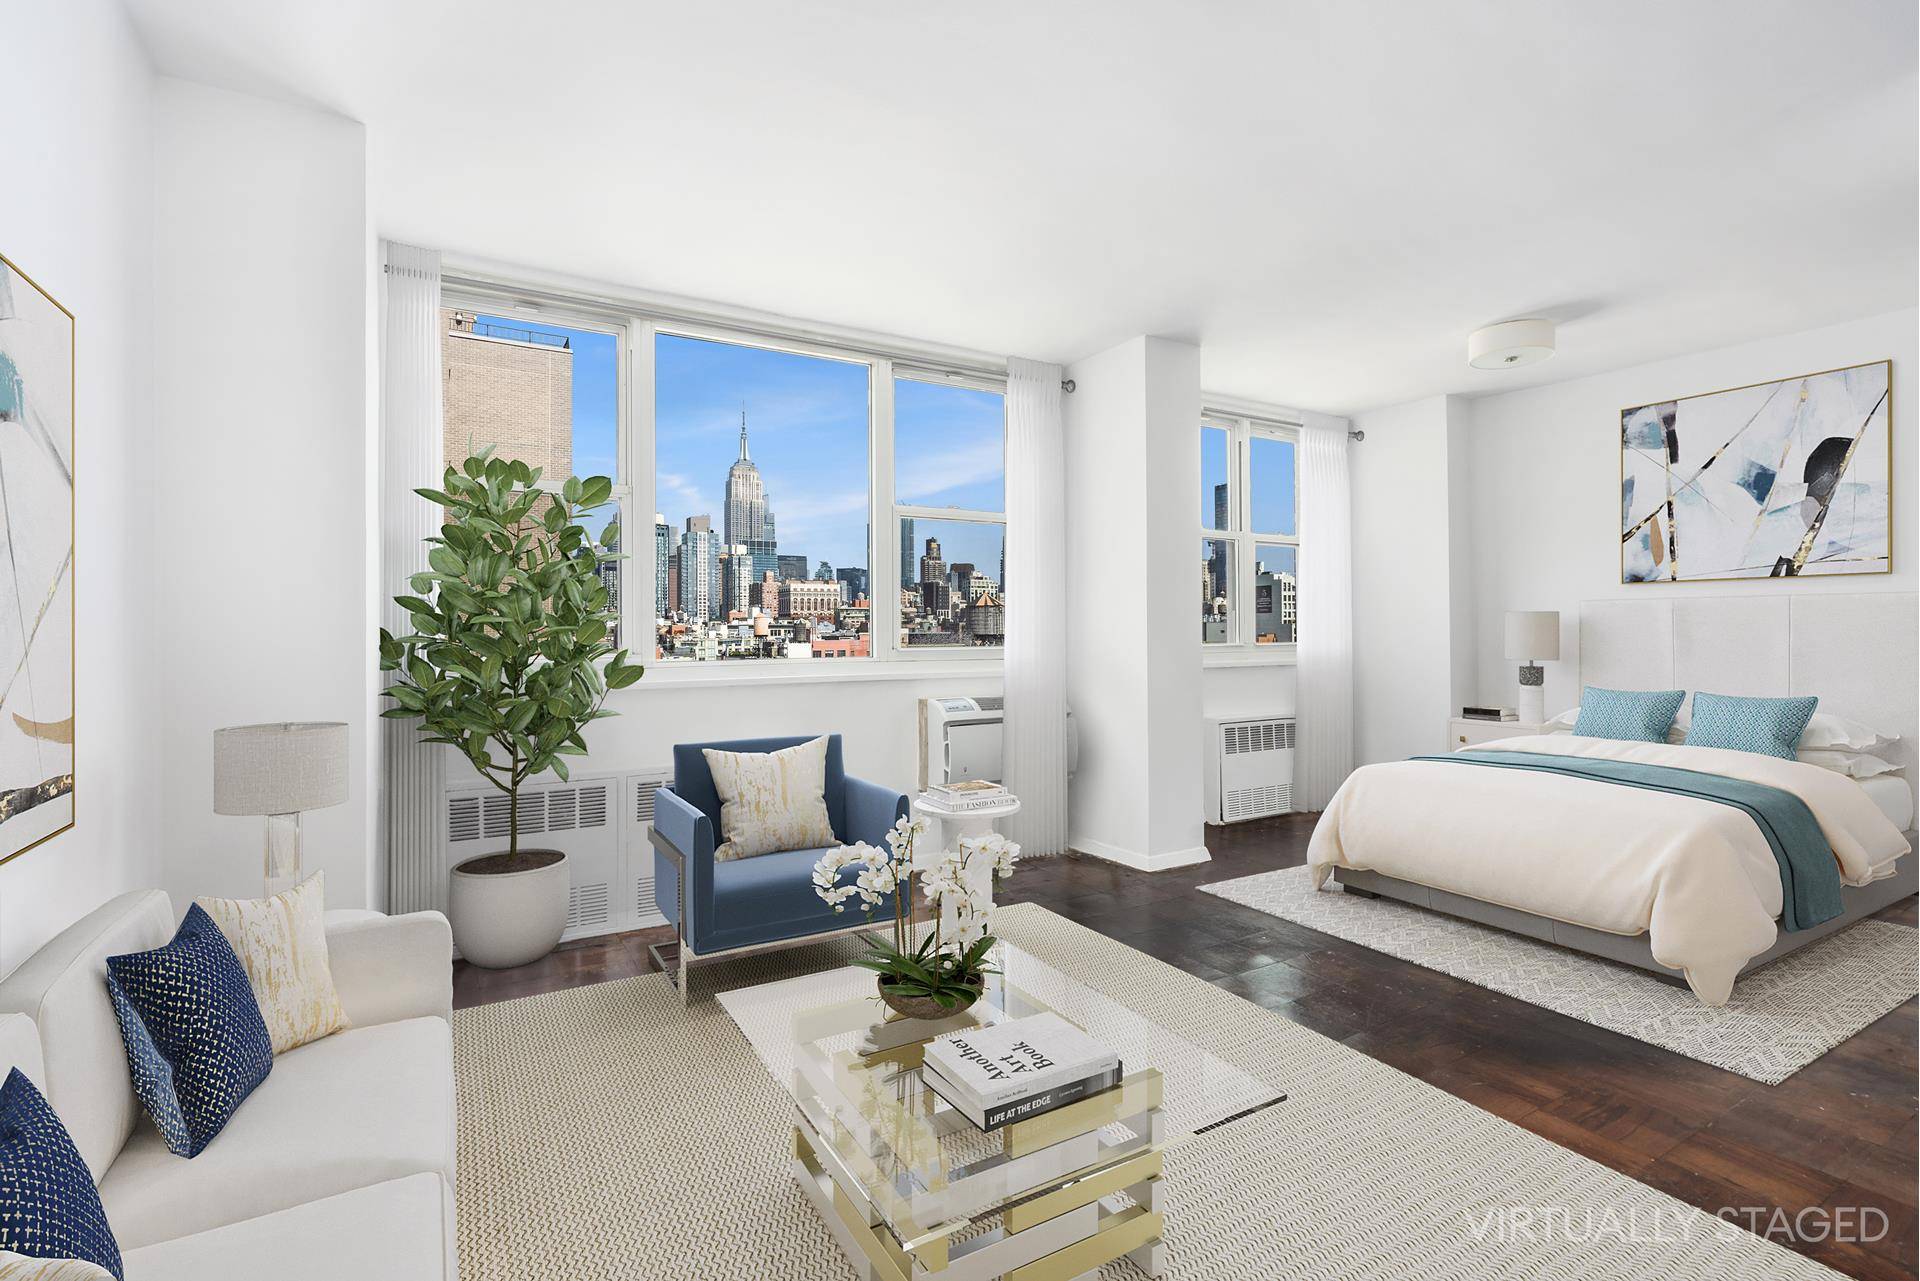 VIEWS VIEWS VIEWS ! Incredible opportunity to own a high floor, oversized alcove studio with spectacular open views over Chelsea to the Empire State and Chrysler Buildings.